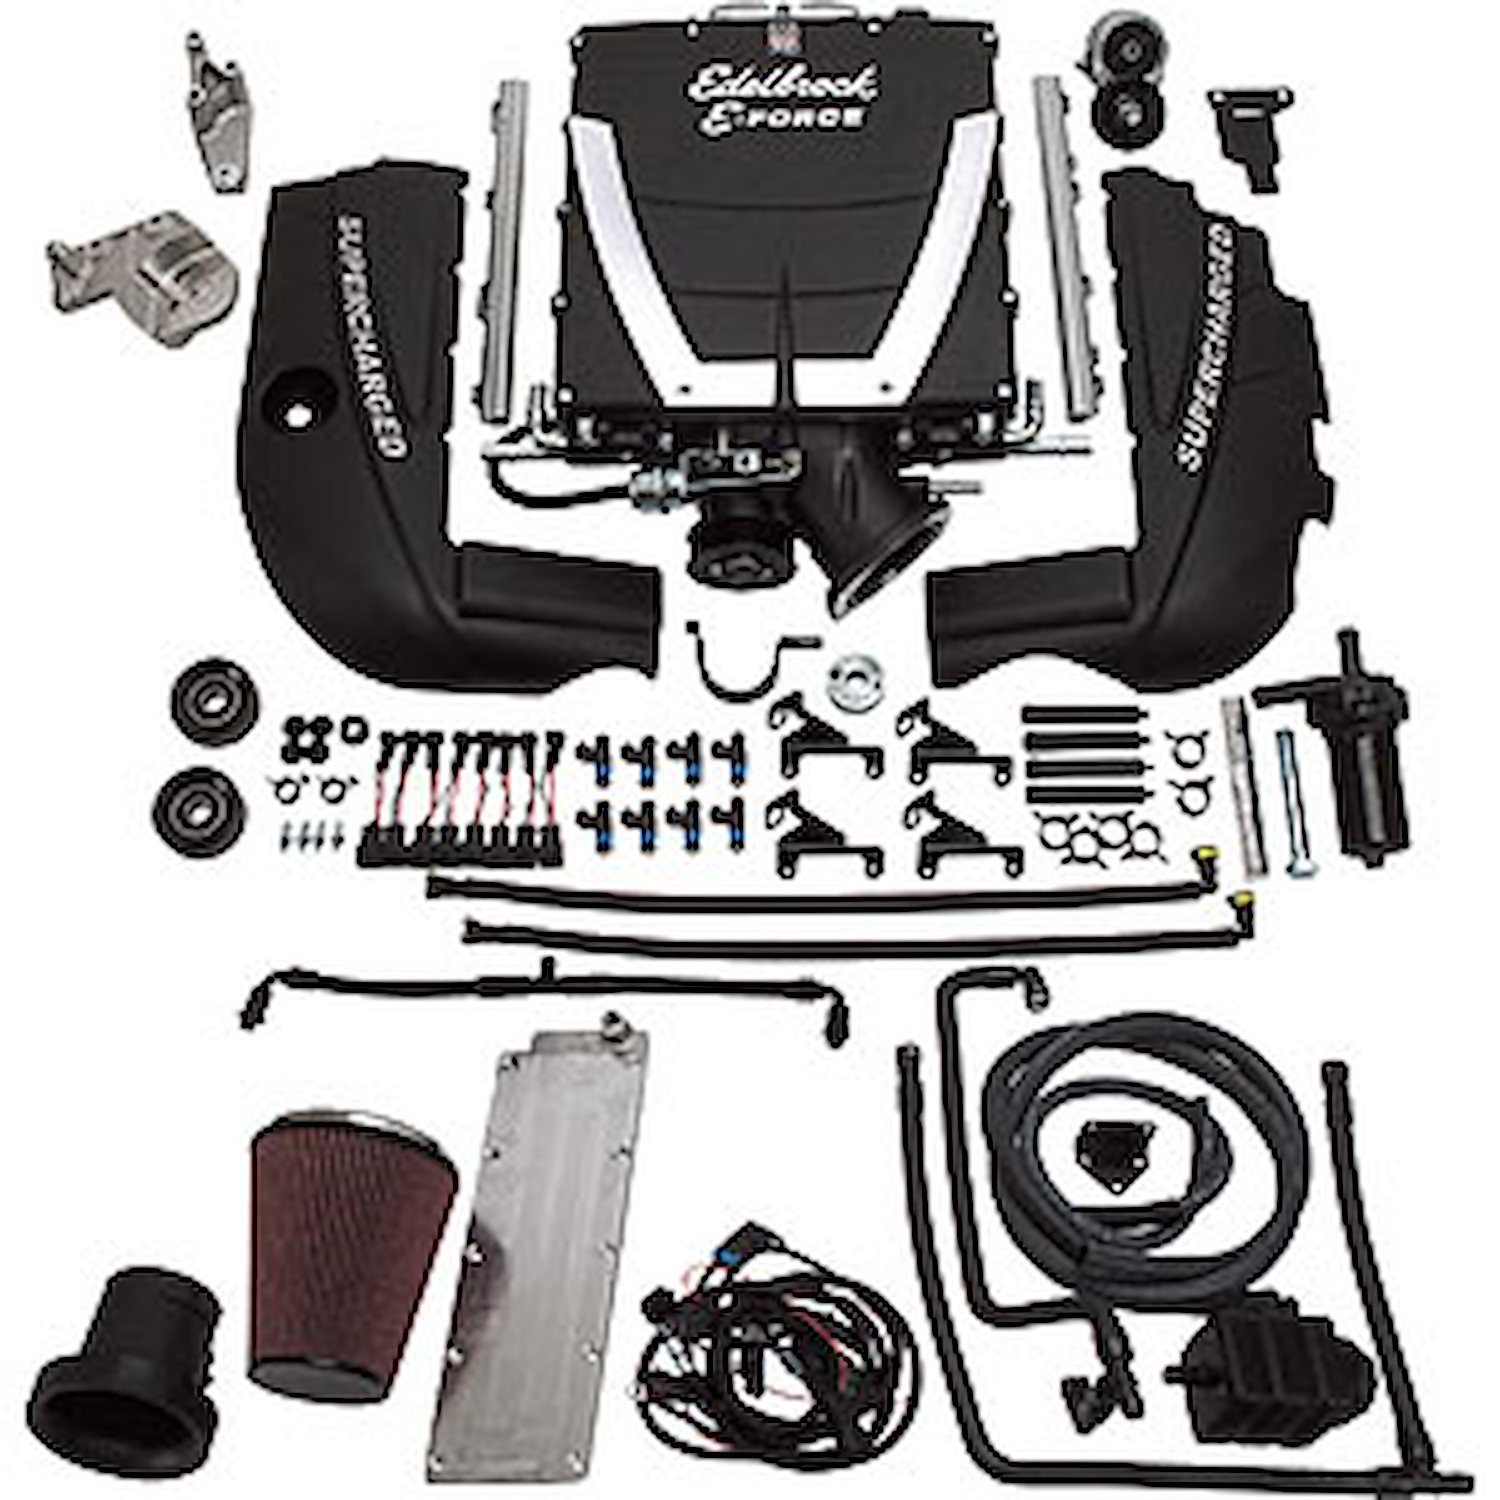 E-Force Universal Supercharger Kit for GM Gen IV LS3 Engine with Gen V Camaro Accessory Drives